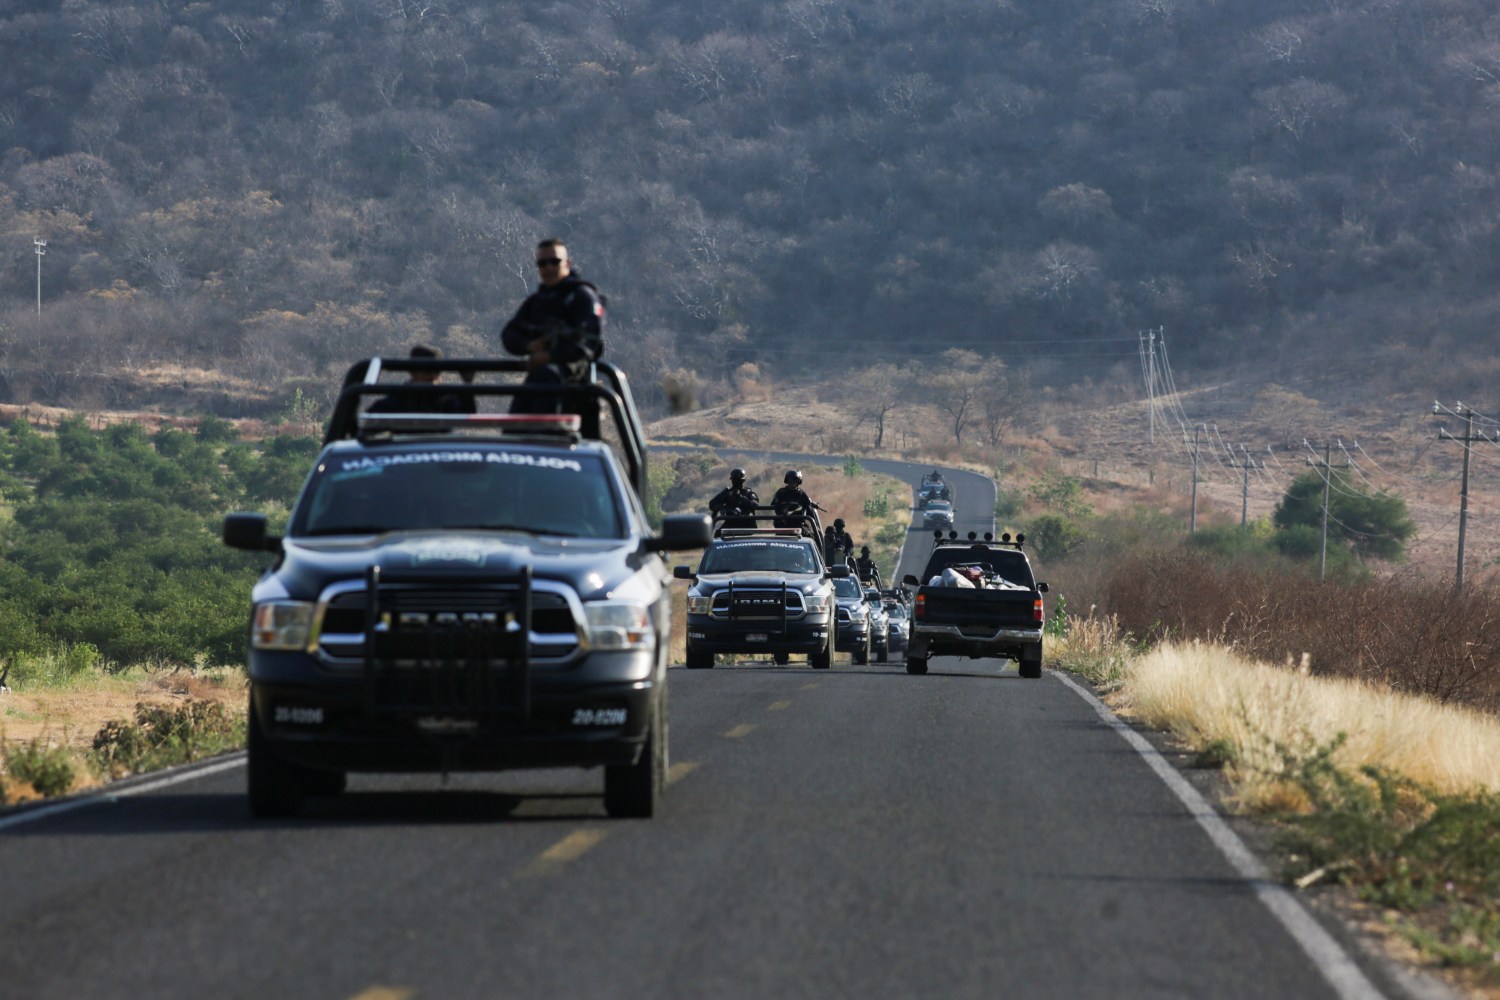 A State police convoy patrols a road in El Aguaje after a visit of Vatican's ambassador to Mexico Franco Coppola to the area and to the municipality of Aguililla, an area where the Jalisco New Generation Cartel (CJNG) and local drug gangs are fighting to control the territory, in Michoacan state, Mexico April 23, 2021. REUTERS/Alan Ortega